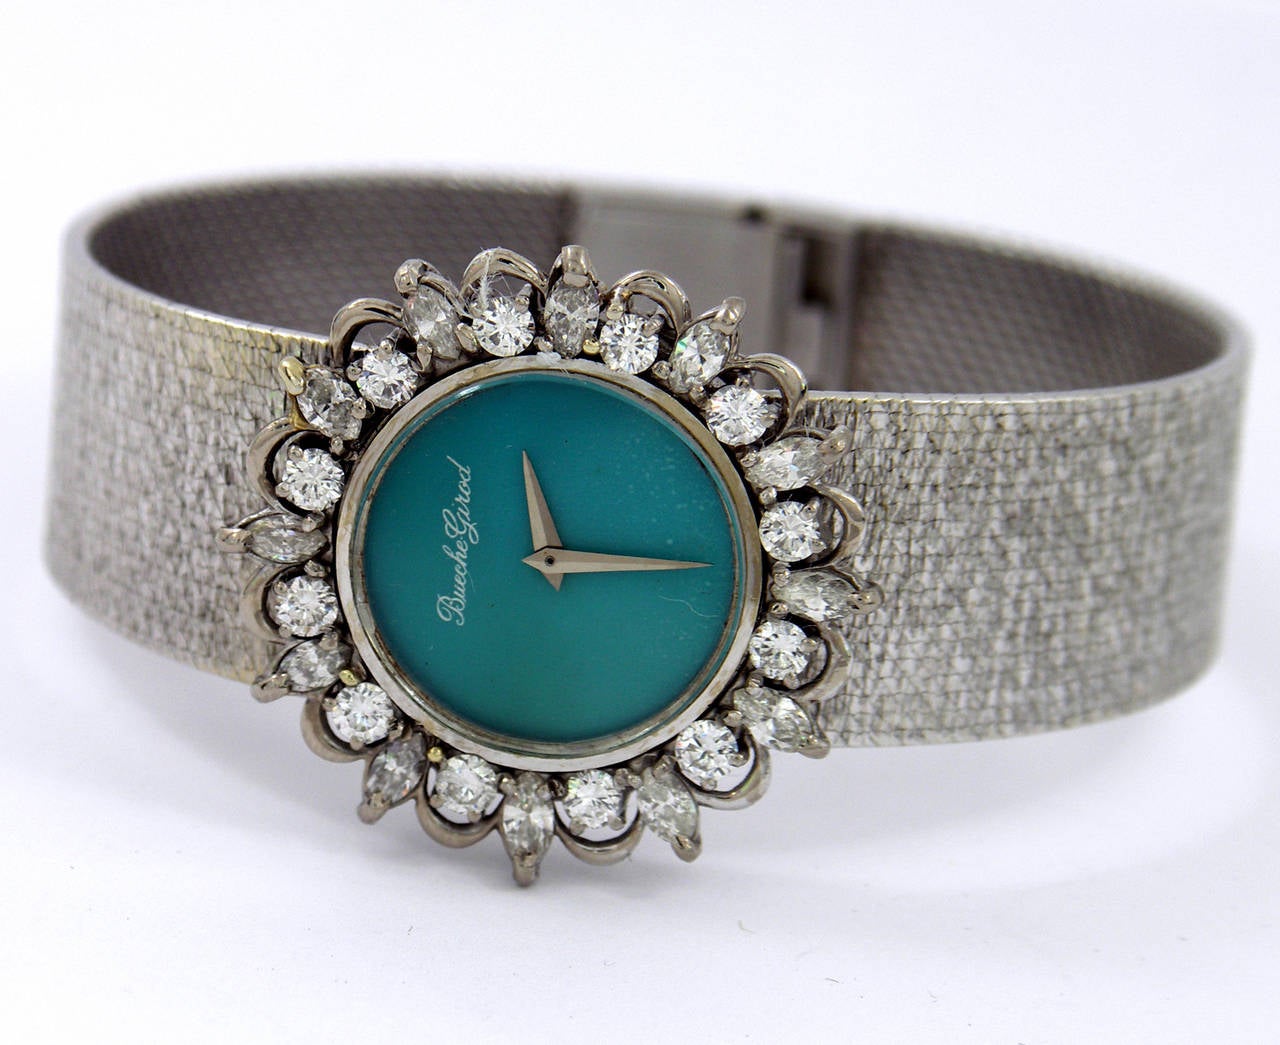 18K white gold, ladies Bueche Girod wristwatch featuring a Persian turquoise dial. The bezel is set with alternating round brilliant, and marquise cut diamonds. Total approximate weight of diamonds is 2.5ct, of F-H color, and VS1/VS2 clarity. The